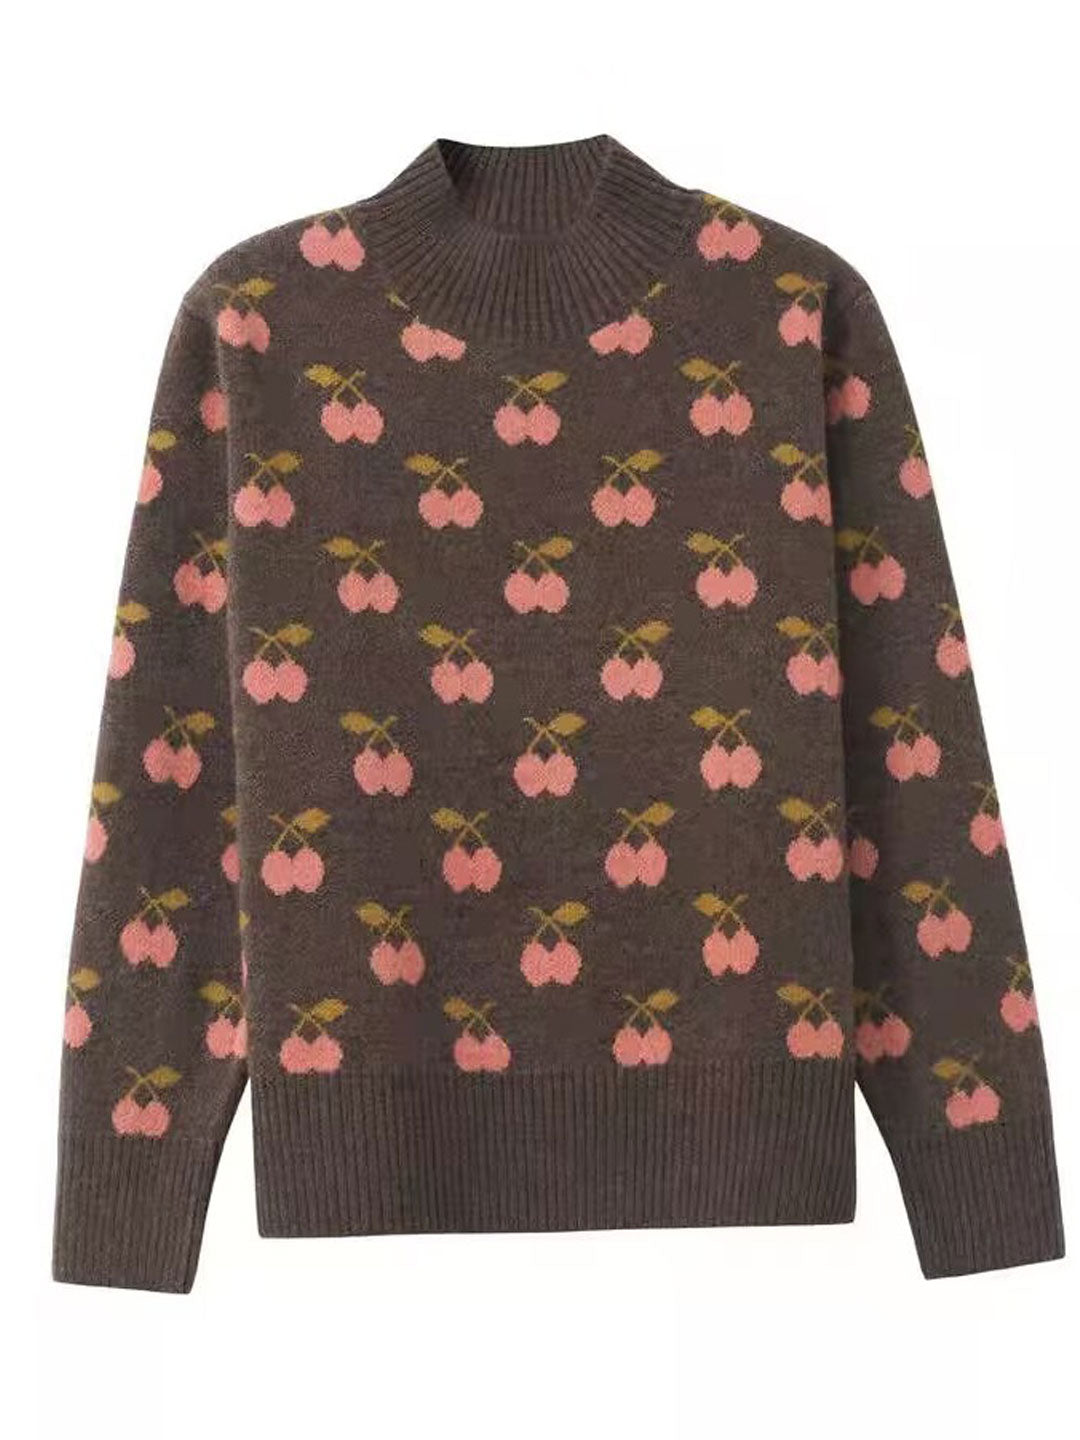 Abigail Retro Turtleneck Jacquard Knitted Pullover Sweater